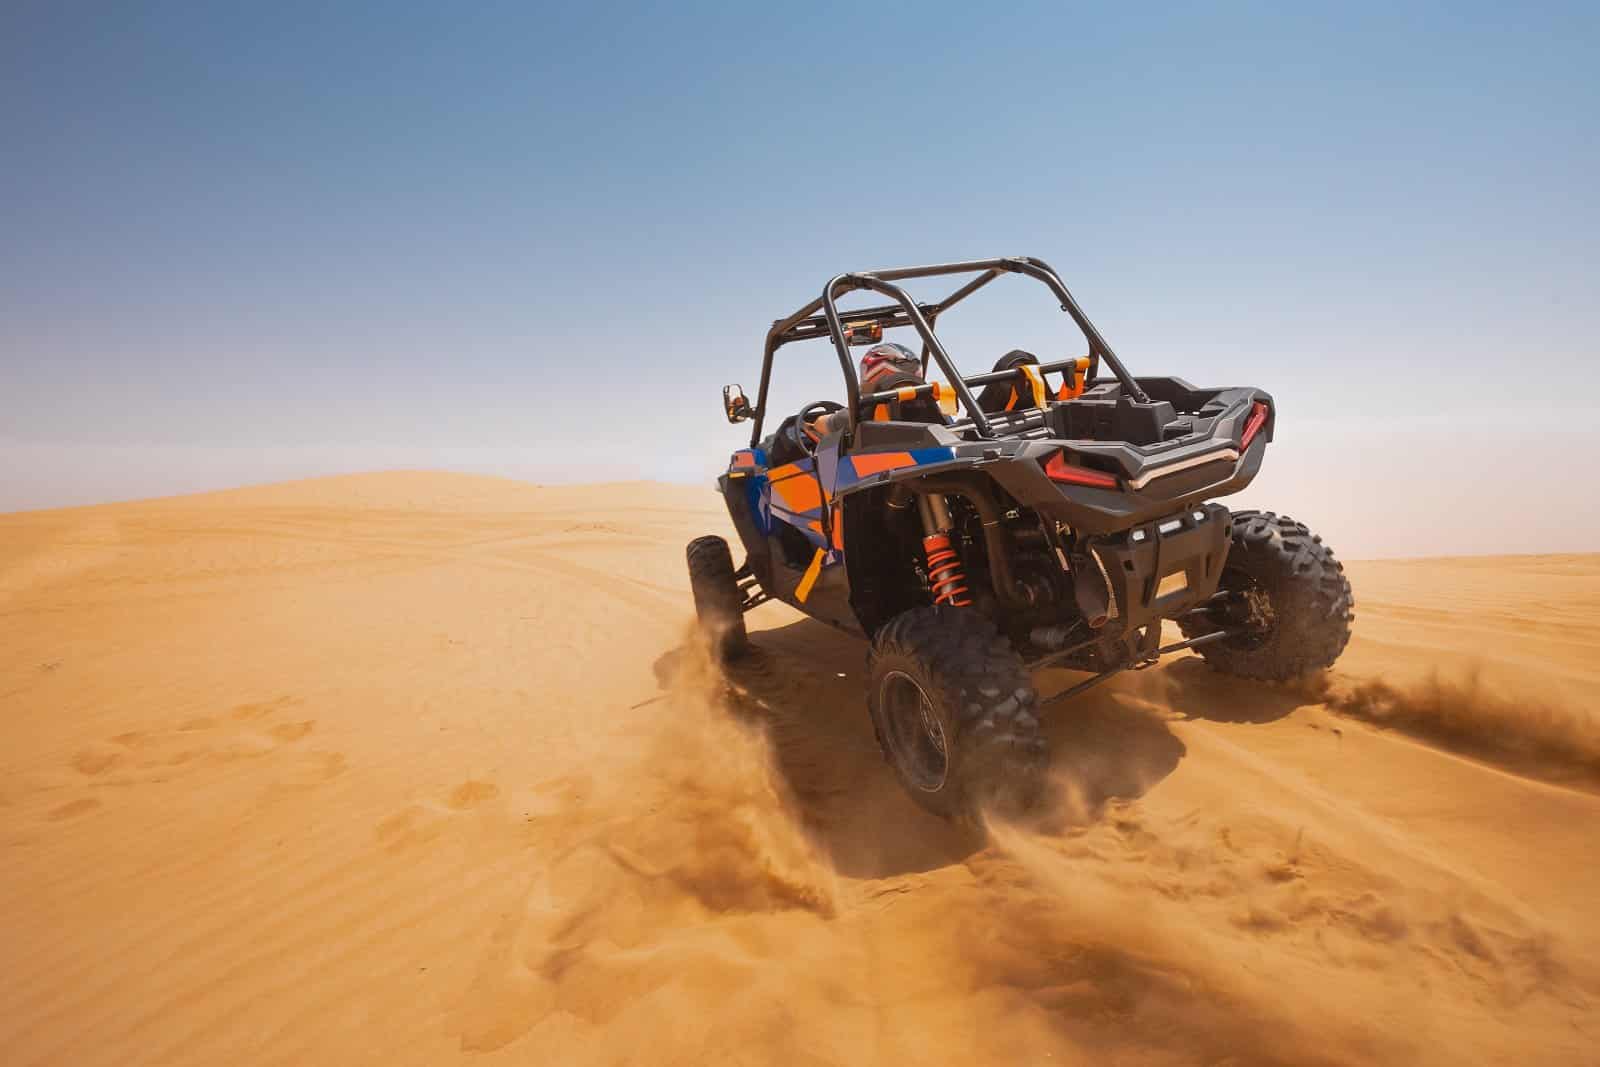 <p><span>Dubai is known for its luxurious cityscape, but it’s also home to some of the most thrilling ATV adventures in its vast deserts. The Arabian Desert around Dubai offers a unique ATV riding experience with its expansive dunes and challenging terrain. Riding across the desert, you’ll experience the thrill of dune bashing and enjoy stunning views of the seemingly endless sandy landscape.</span></p> <p><b>Insider’s Tip: </b><span>Combine your ATV adventure with a desert safari for a complete Arabian Desert experience.</span></p> <p><b>When To Travel: </b><span>Visit from November to March when the weather is cooler and more comfortable for desert activities.</span></p> <p><b>How To Get There: </b><span>Fly into Dubai International Airport. Desert ATV tours are usually organized by local operators with transportation from the city.</span></p>